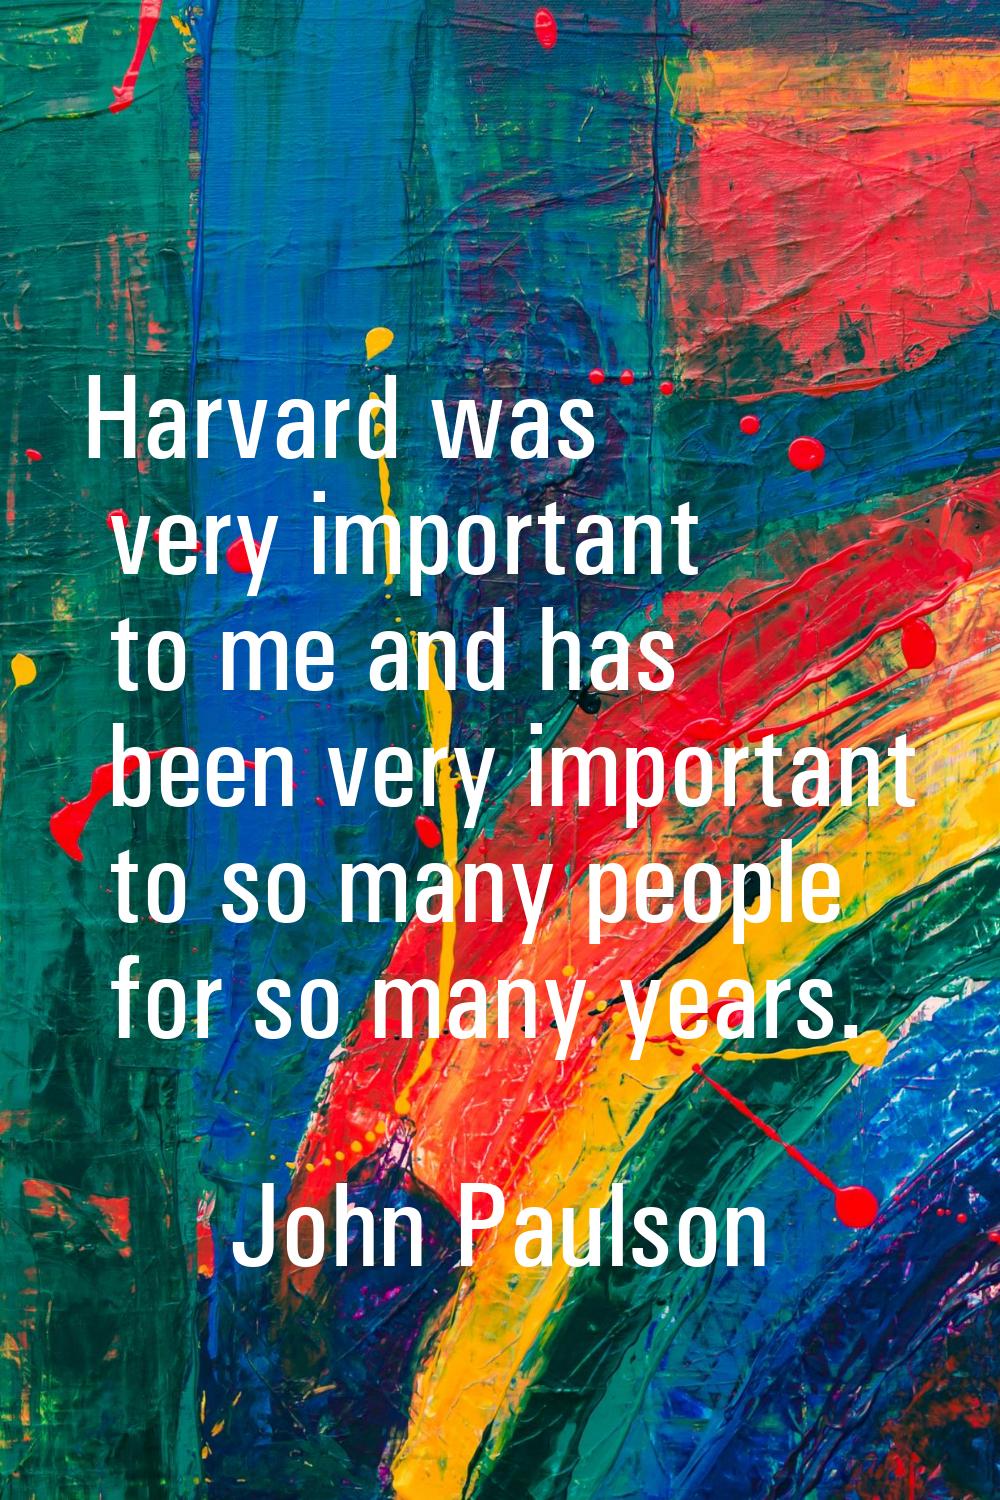 Harvard was very important to me and has been very important to so many people for so many years.